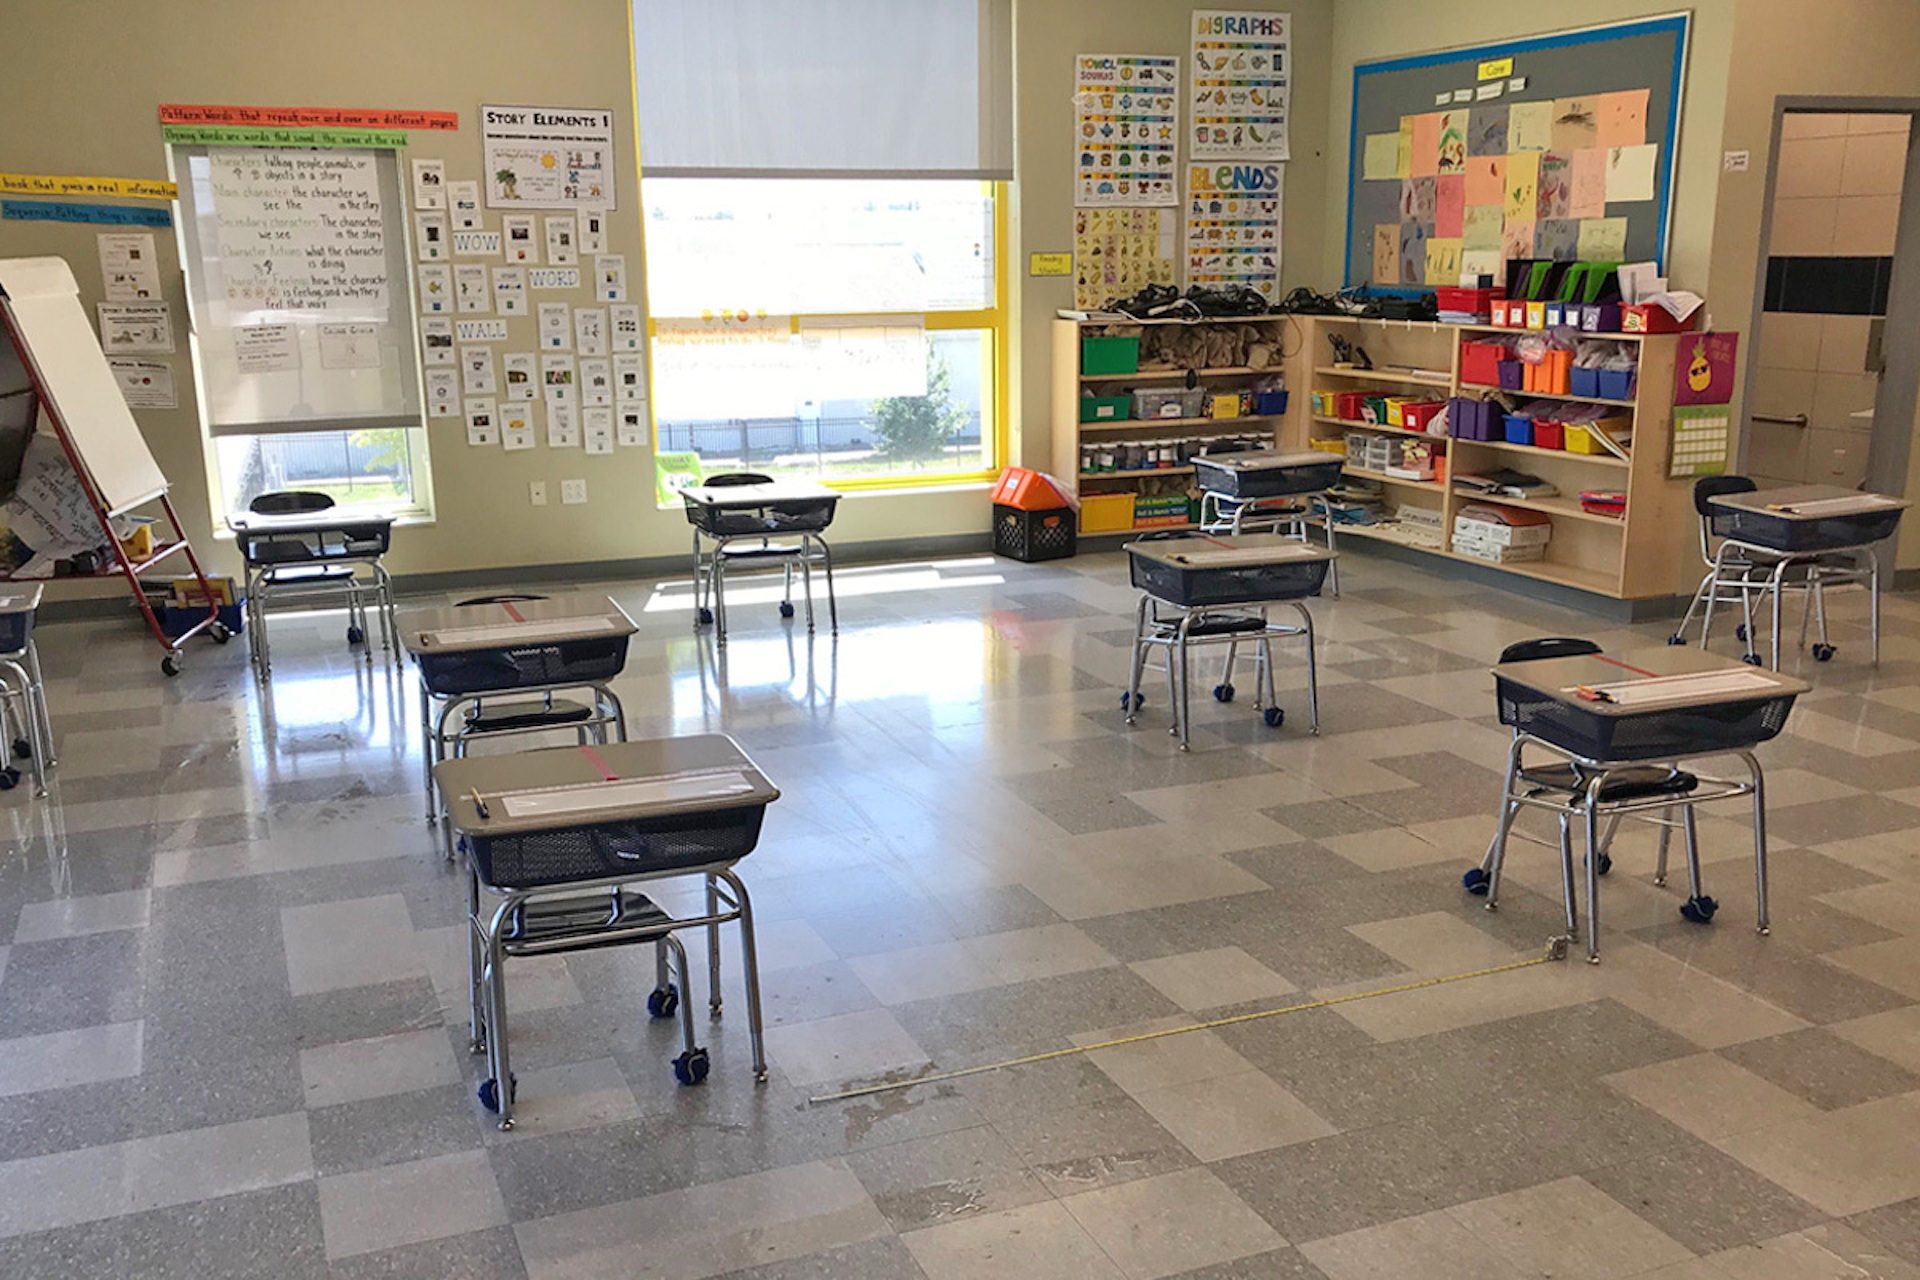 Desks are spaced out 6-feet apart in a classroom at Camden Prep, a charter school in Camden, New Jersey.